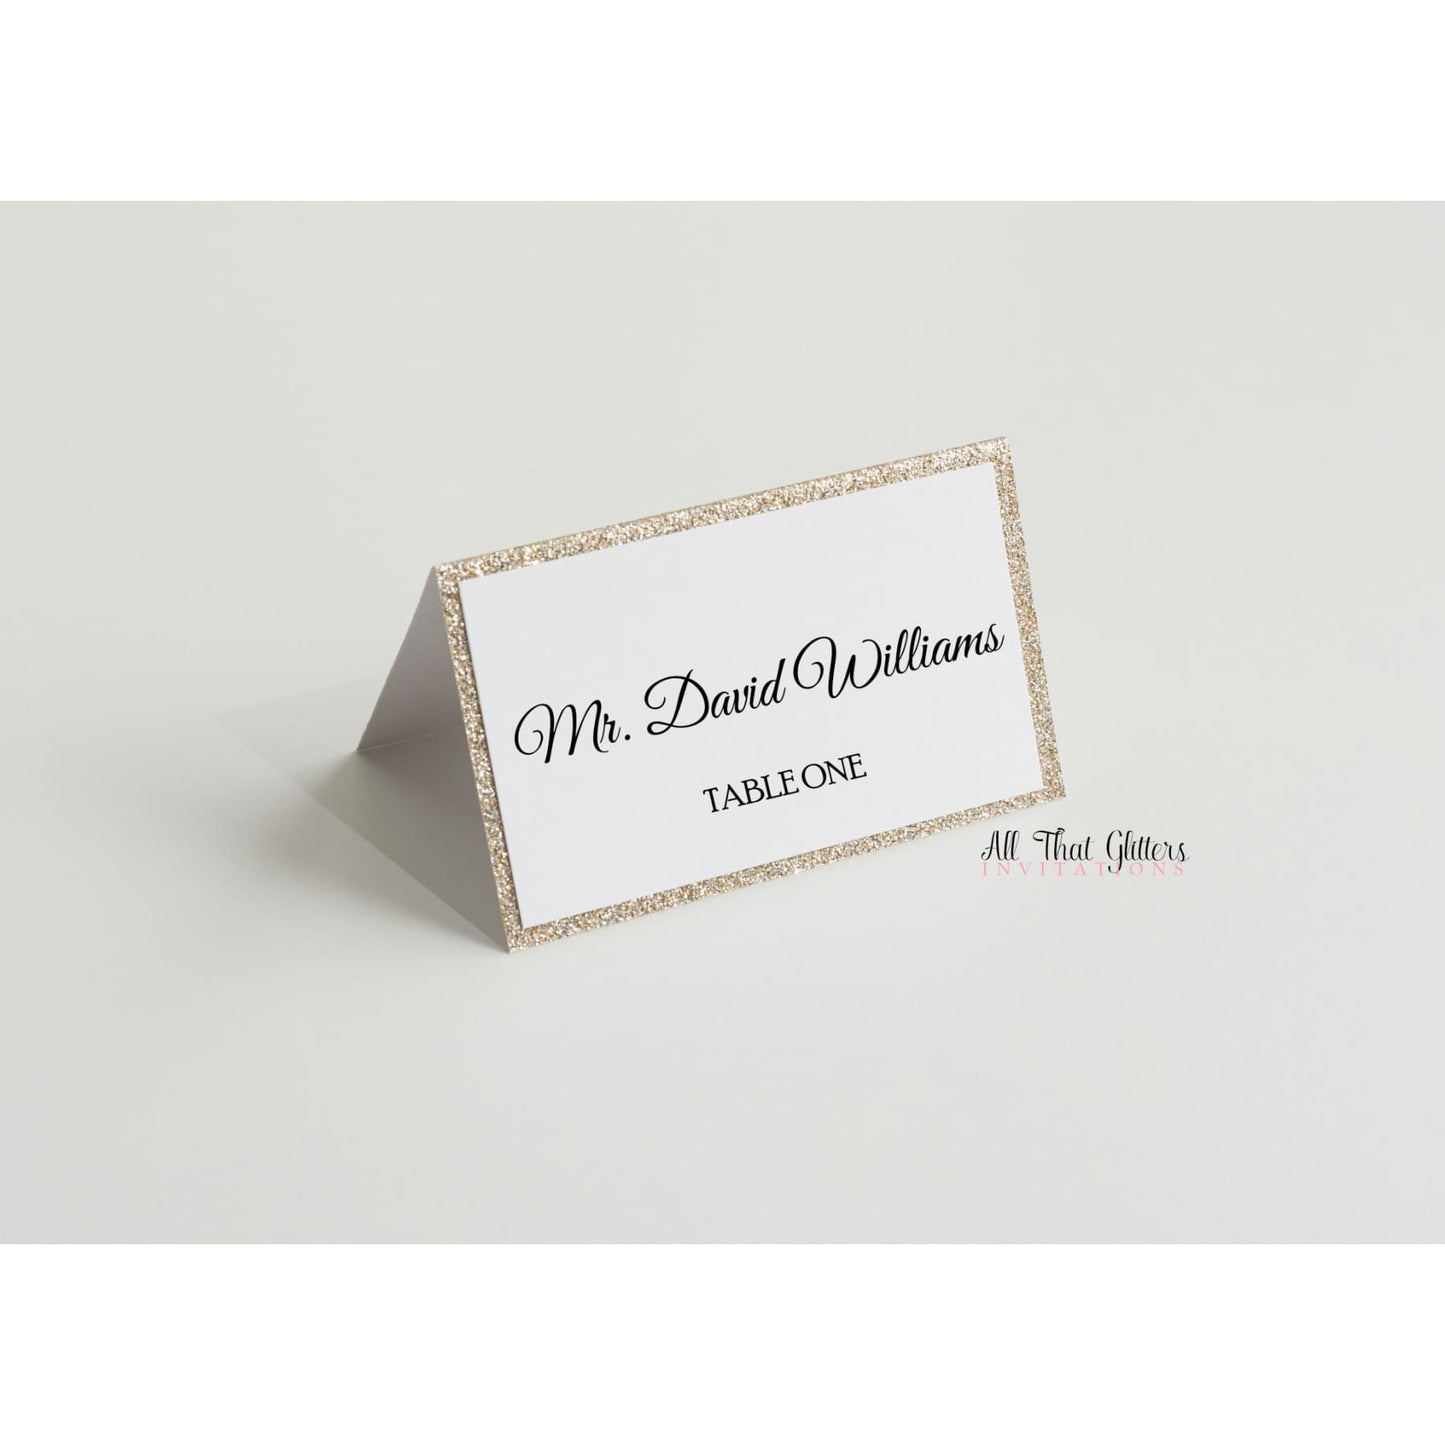 Glitter Wedding Reception Place Cards - All That Glitters Invitations